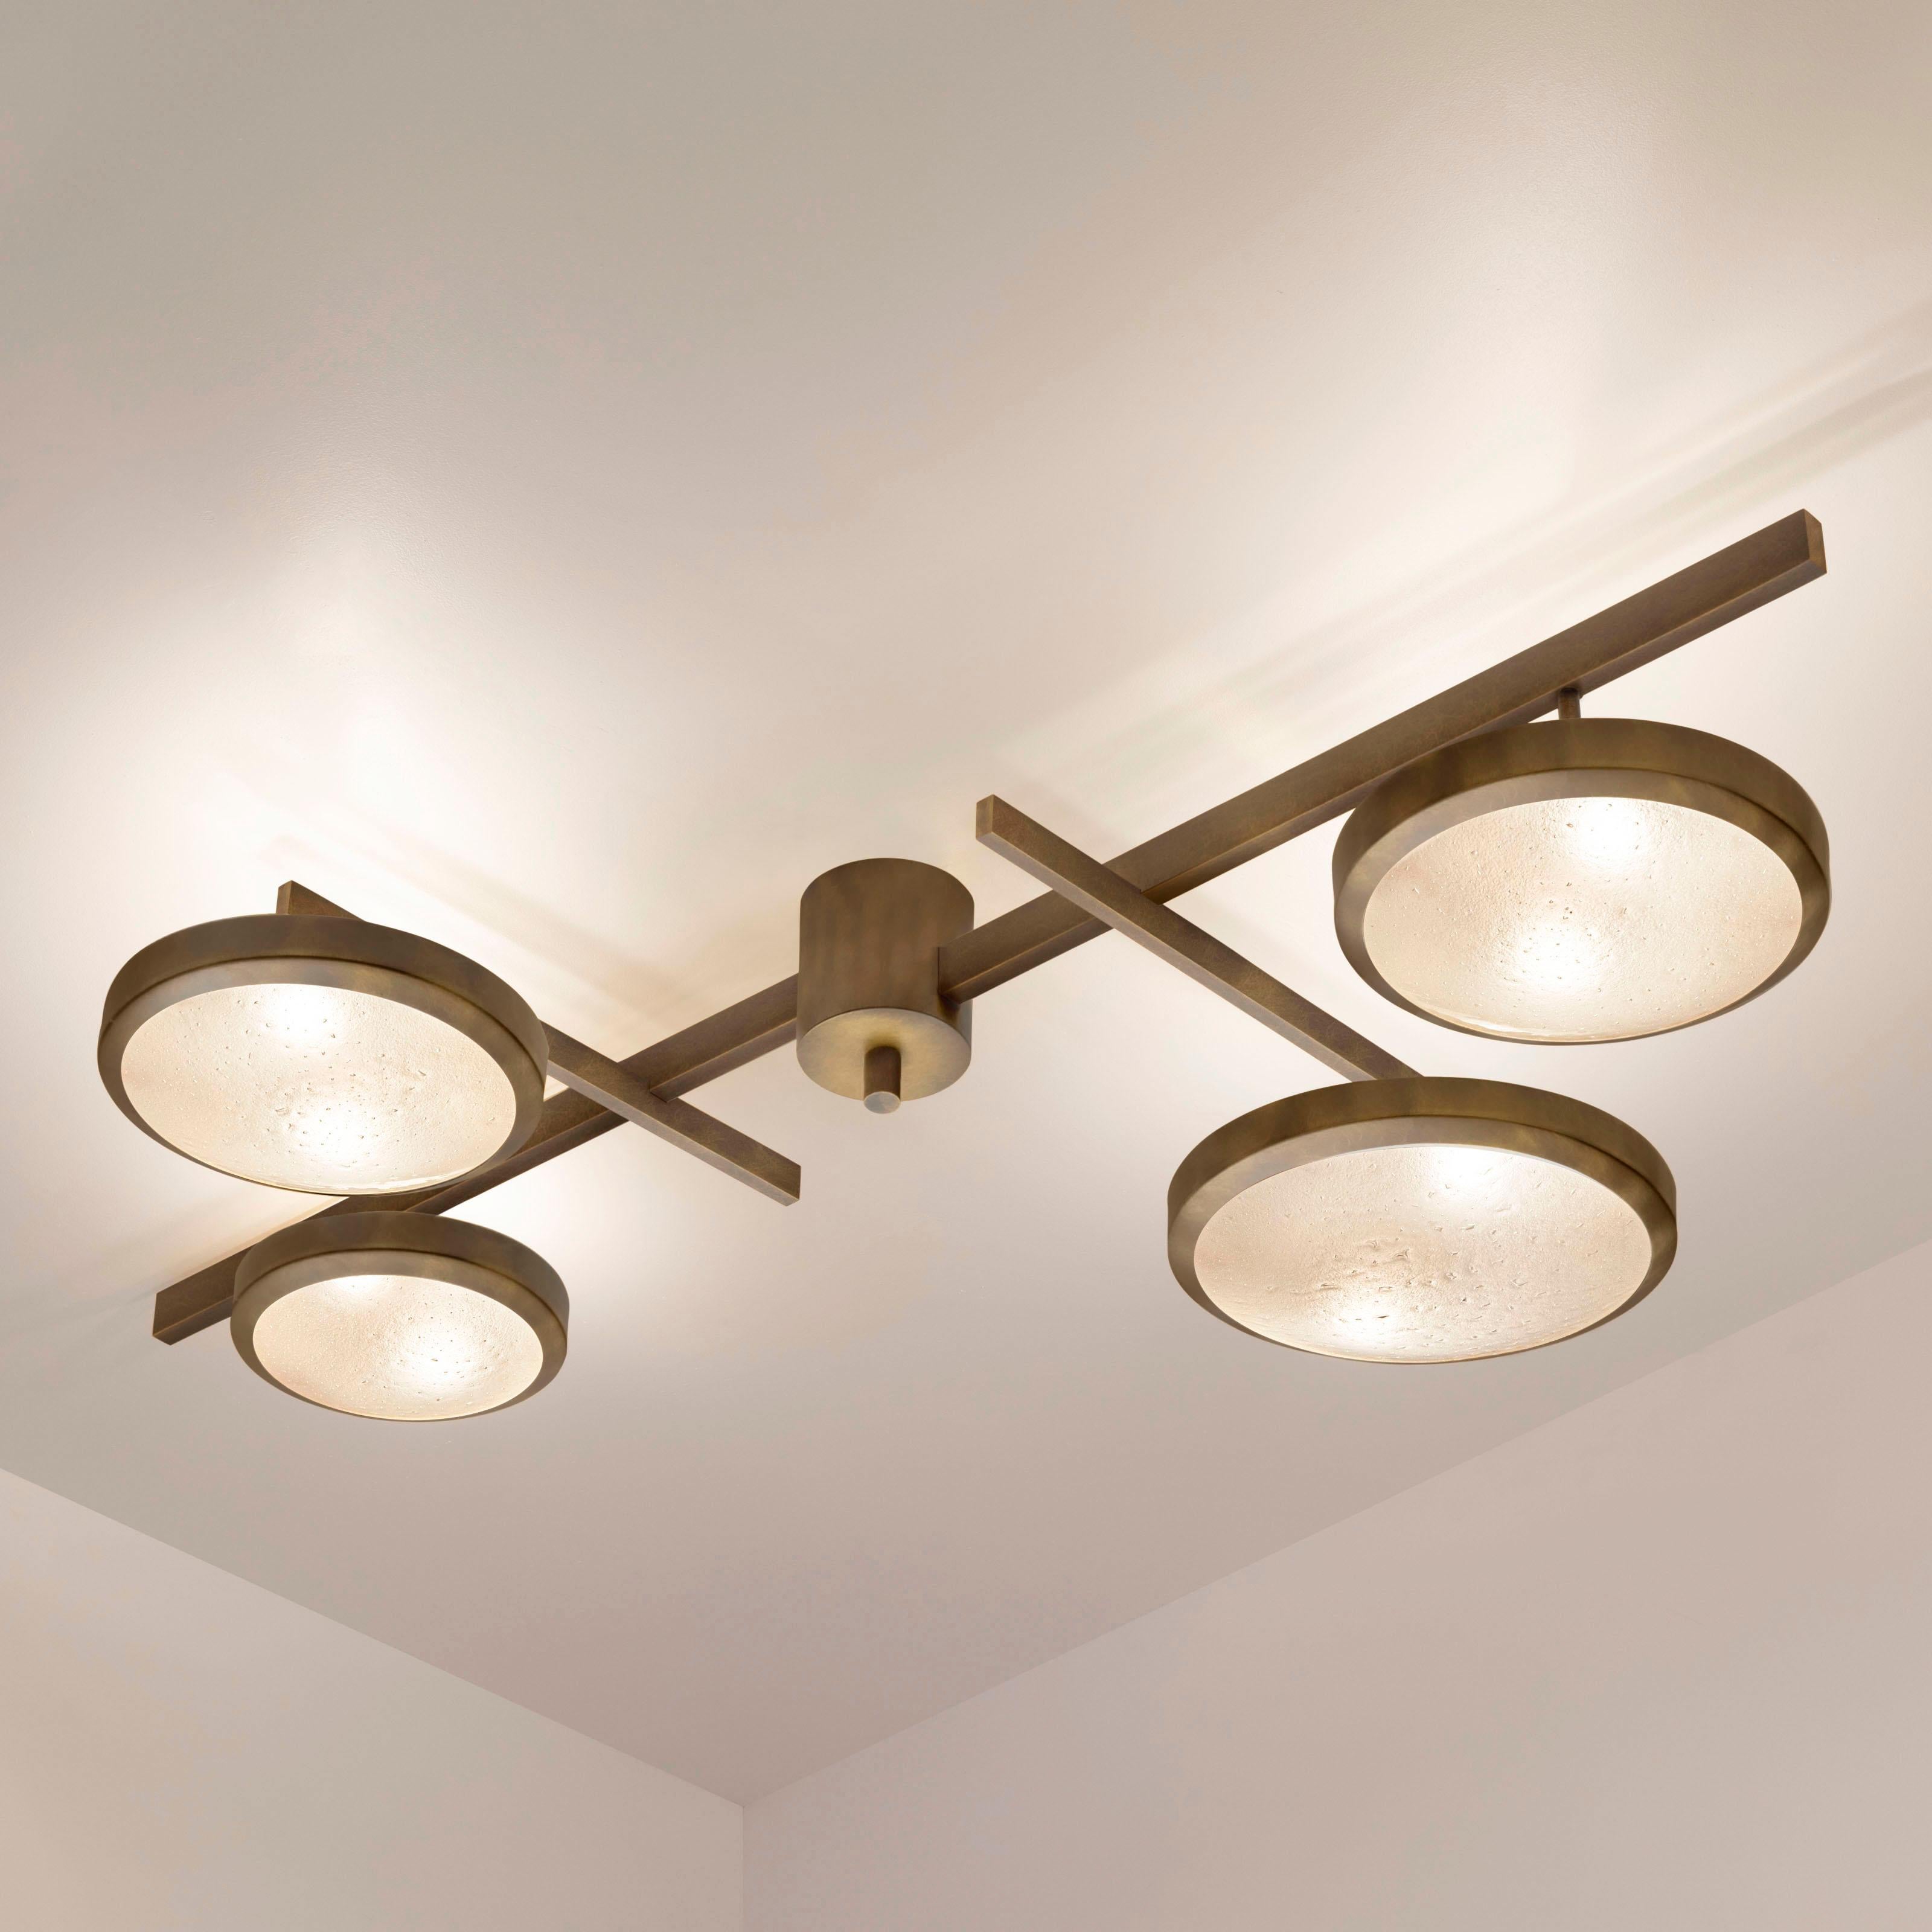 Brass Tetrix Ceiling Light by Gaspare Asaro - Satin Nickel Finish For Sale